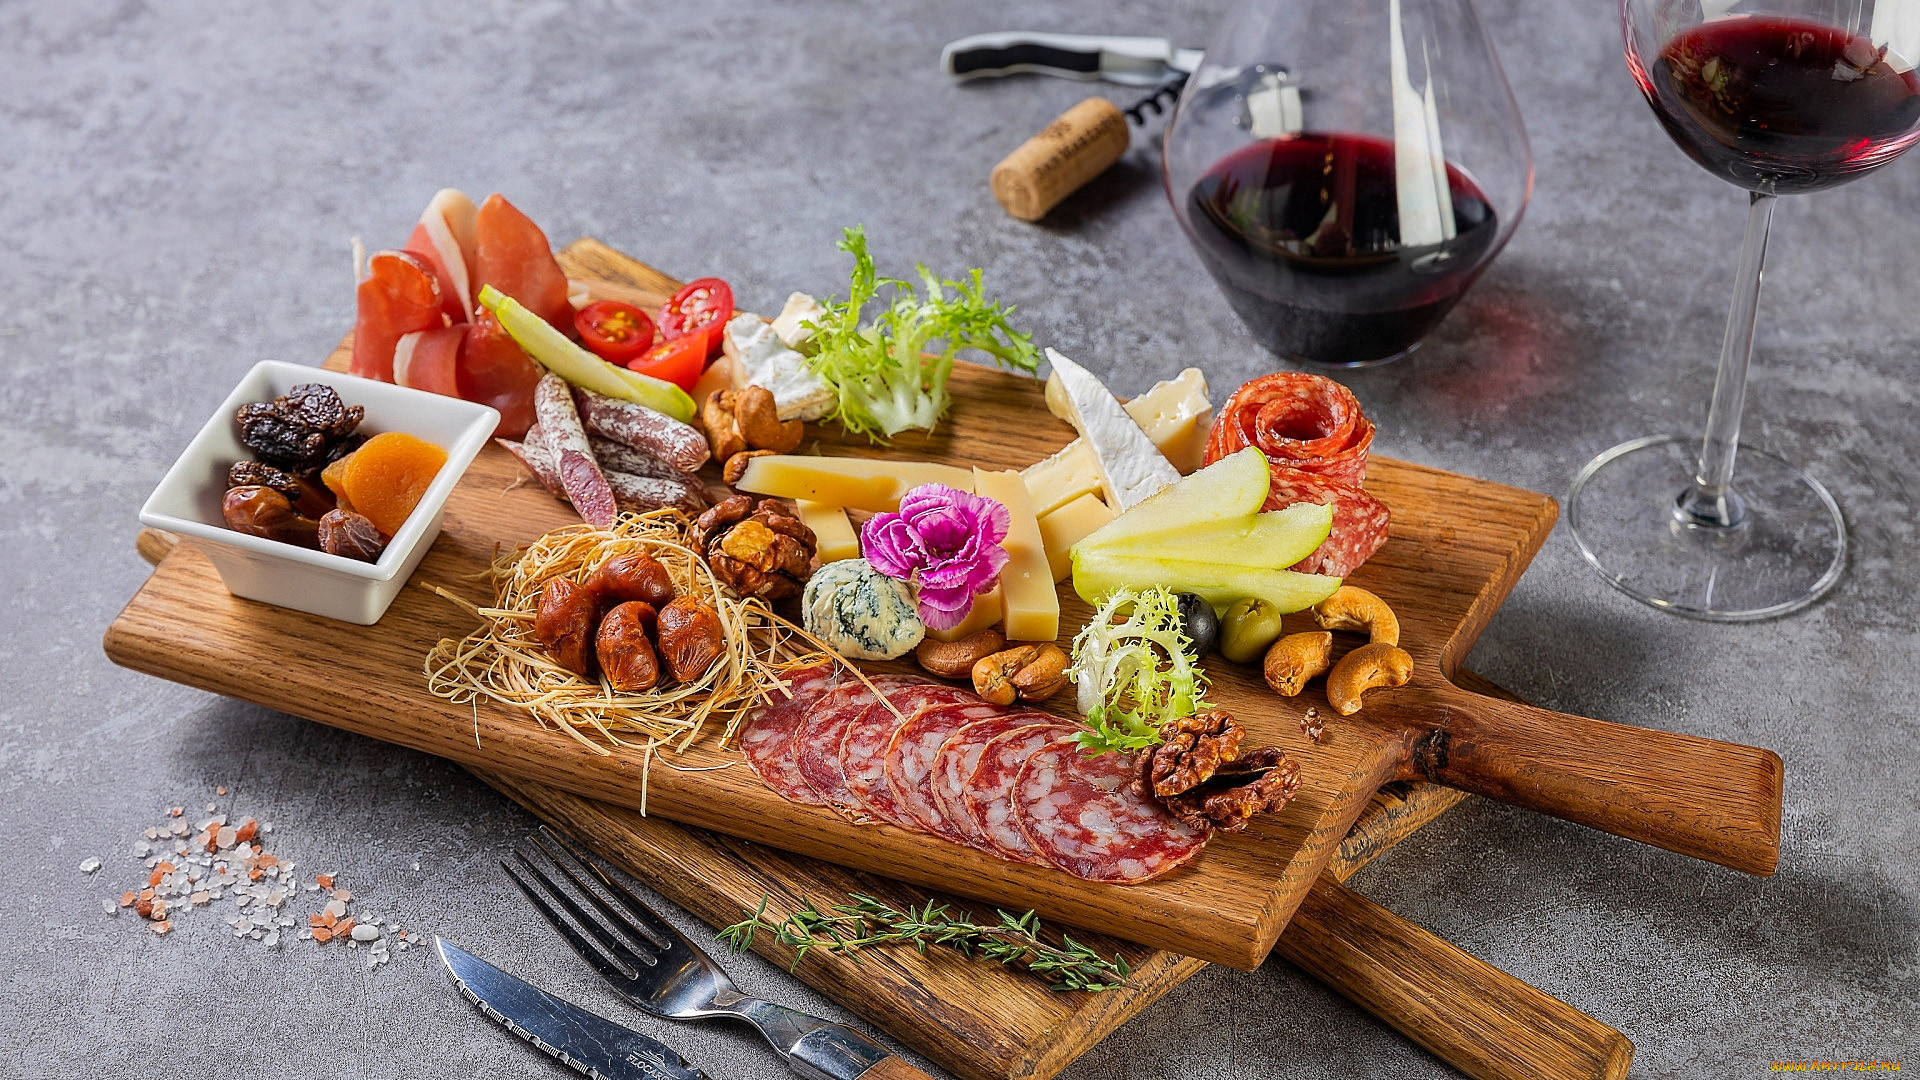 Food Fork Knife Sausage Cheese Vegetables Tomatoes Wine Olives Nuts 1920x1080